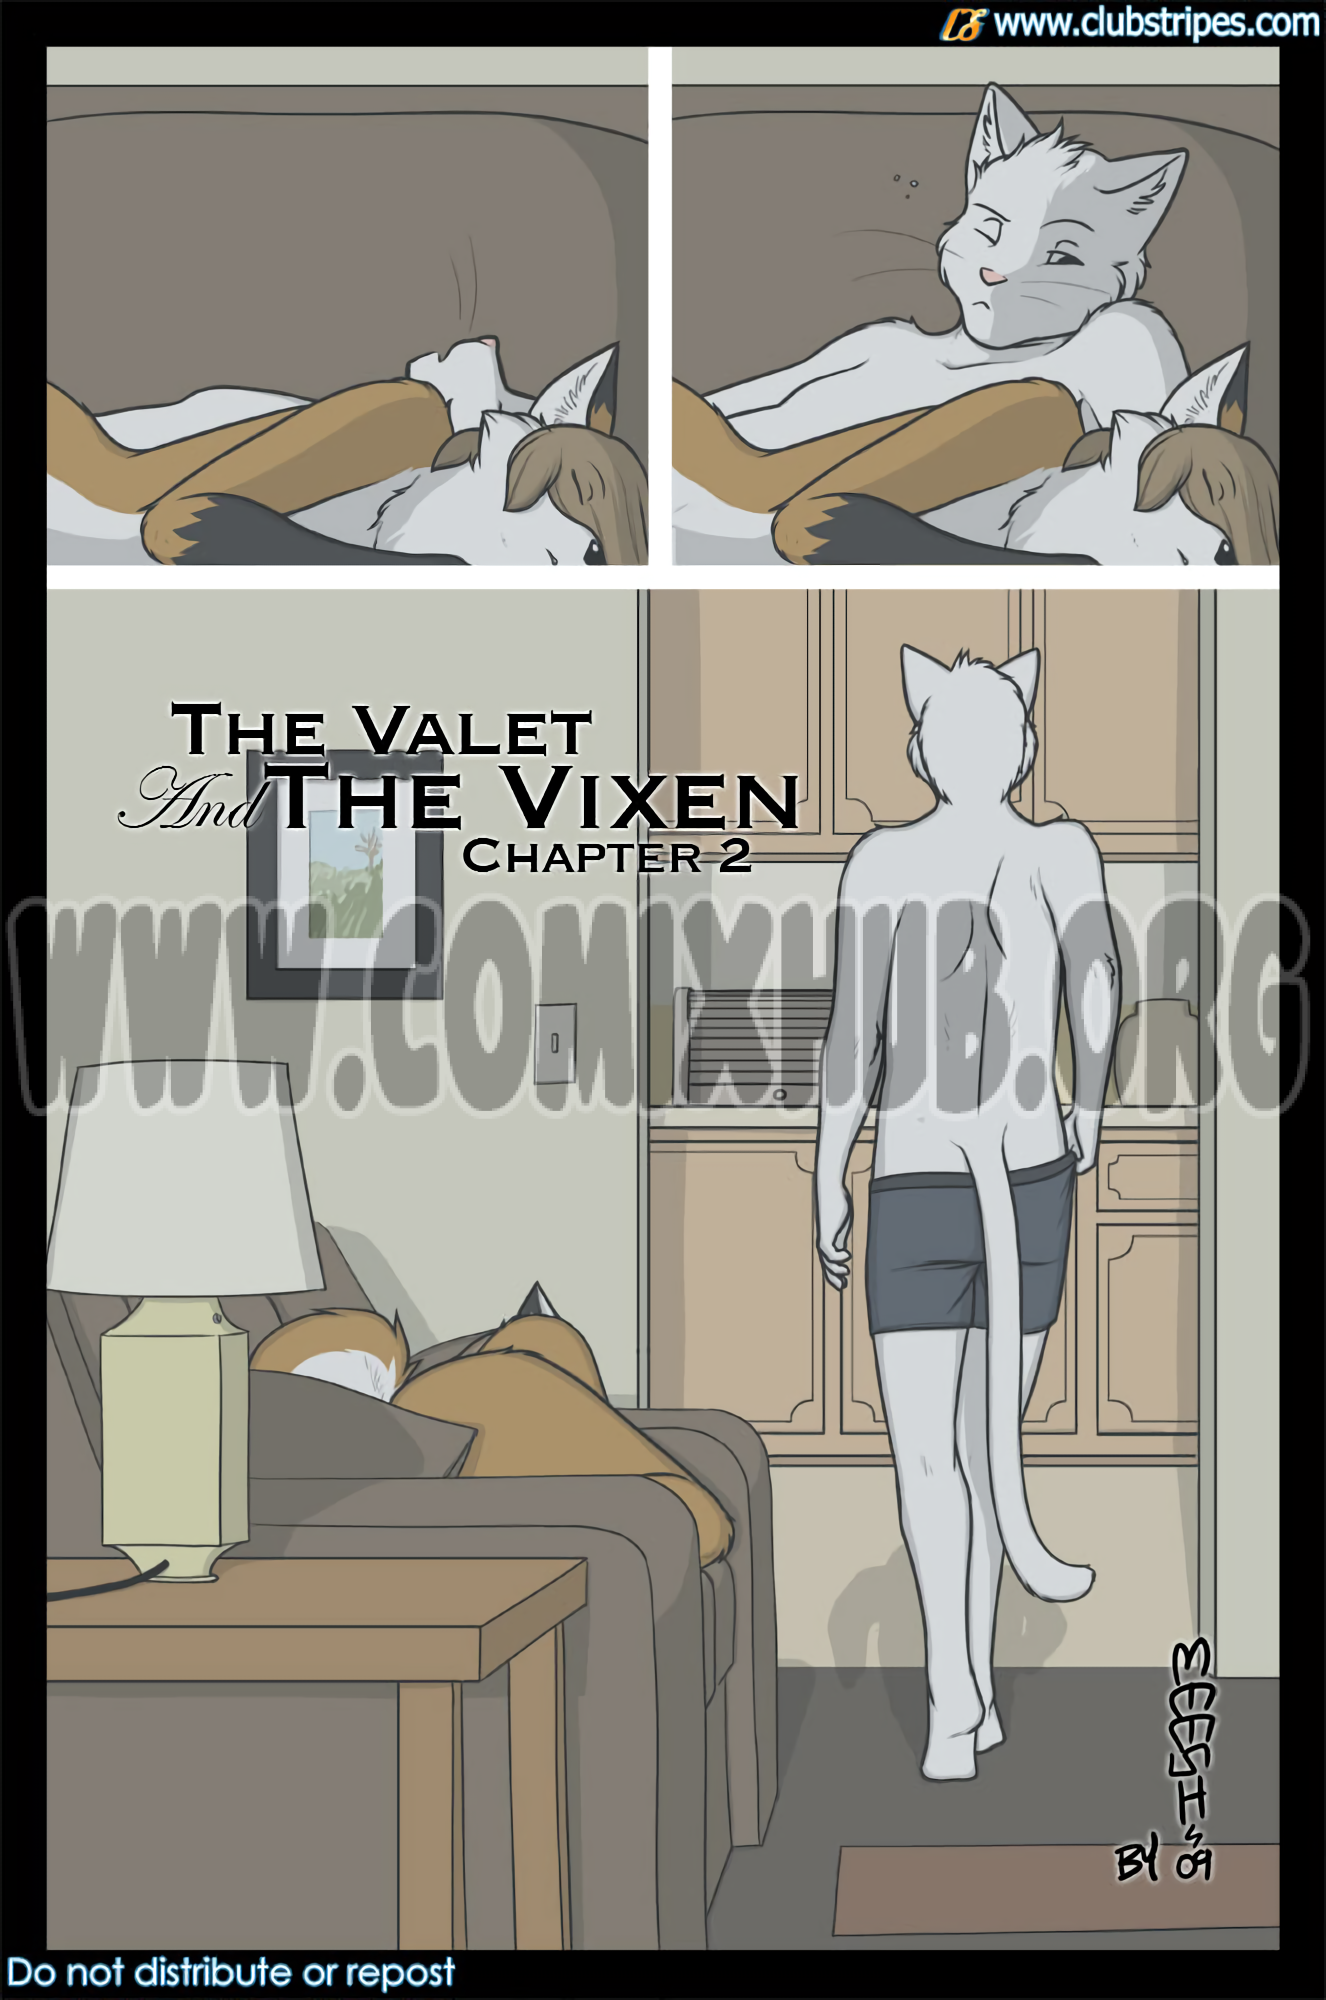 The Valet and The Vixen and Other Tales Oral sex, Blowjob, Creampie, Cum Swallow, cunnilingus, Deepthroat, Furry, Masturbation, Straight, Titfuck